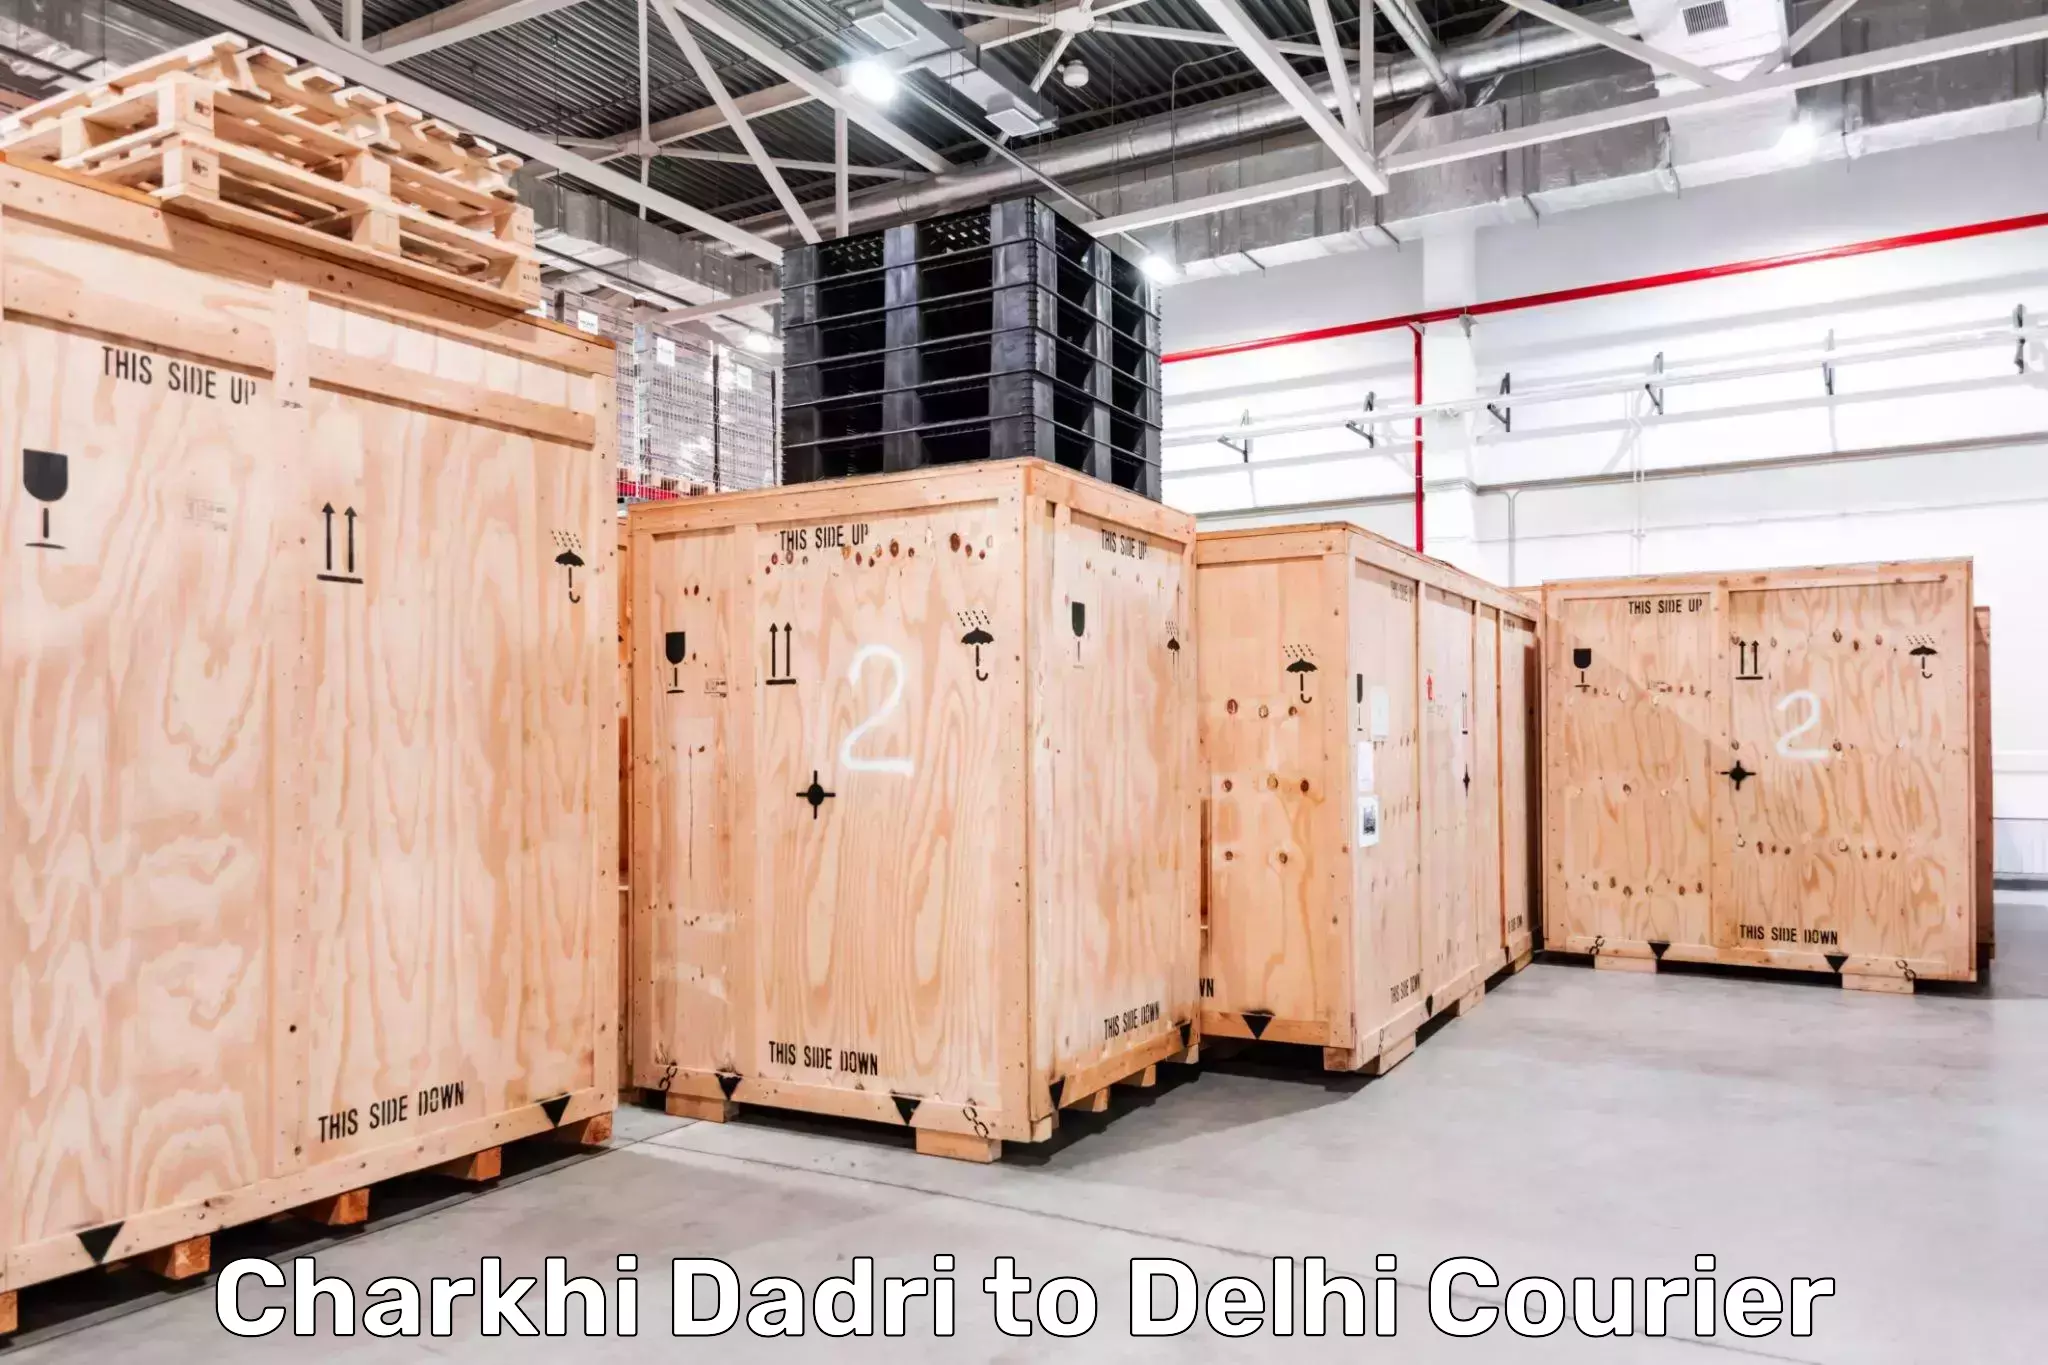 Same-day delivery solutions Charkhi Dadri to East Delhi